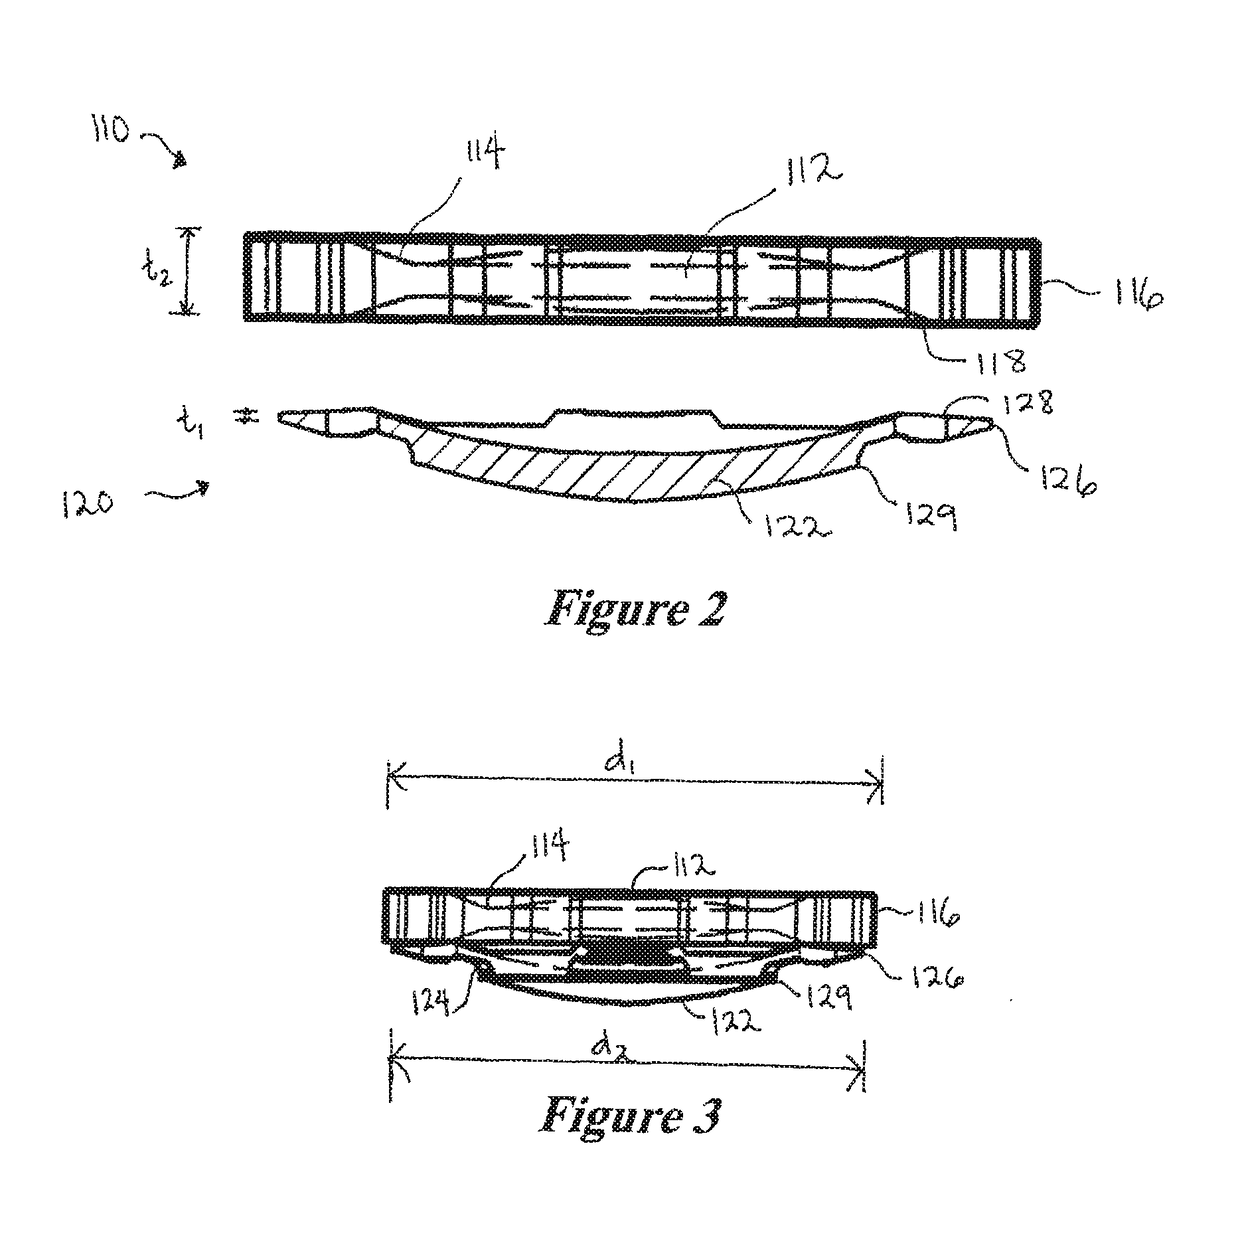 Two-part accomodating intraocular lens device